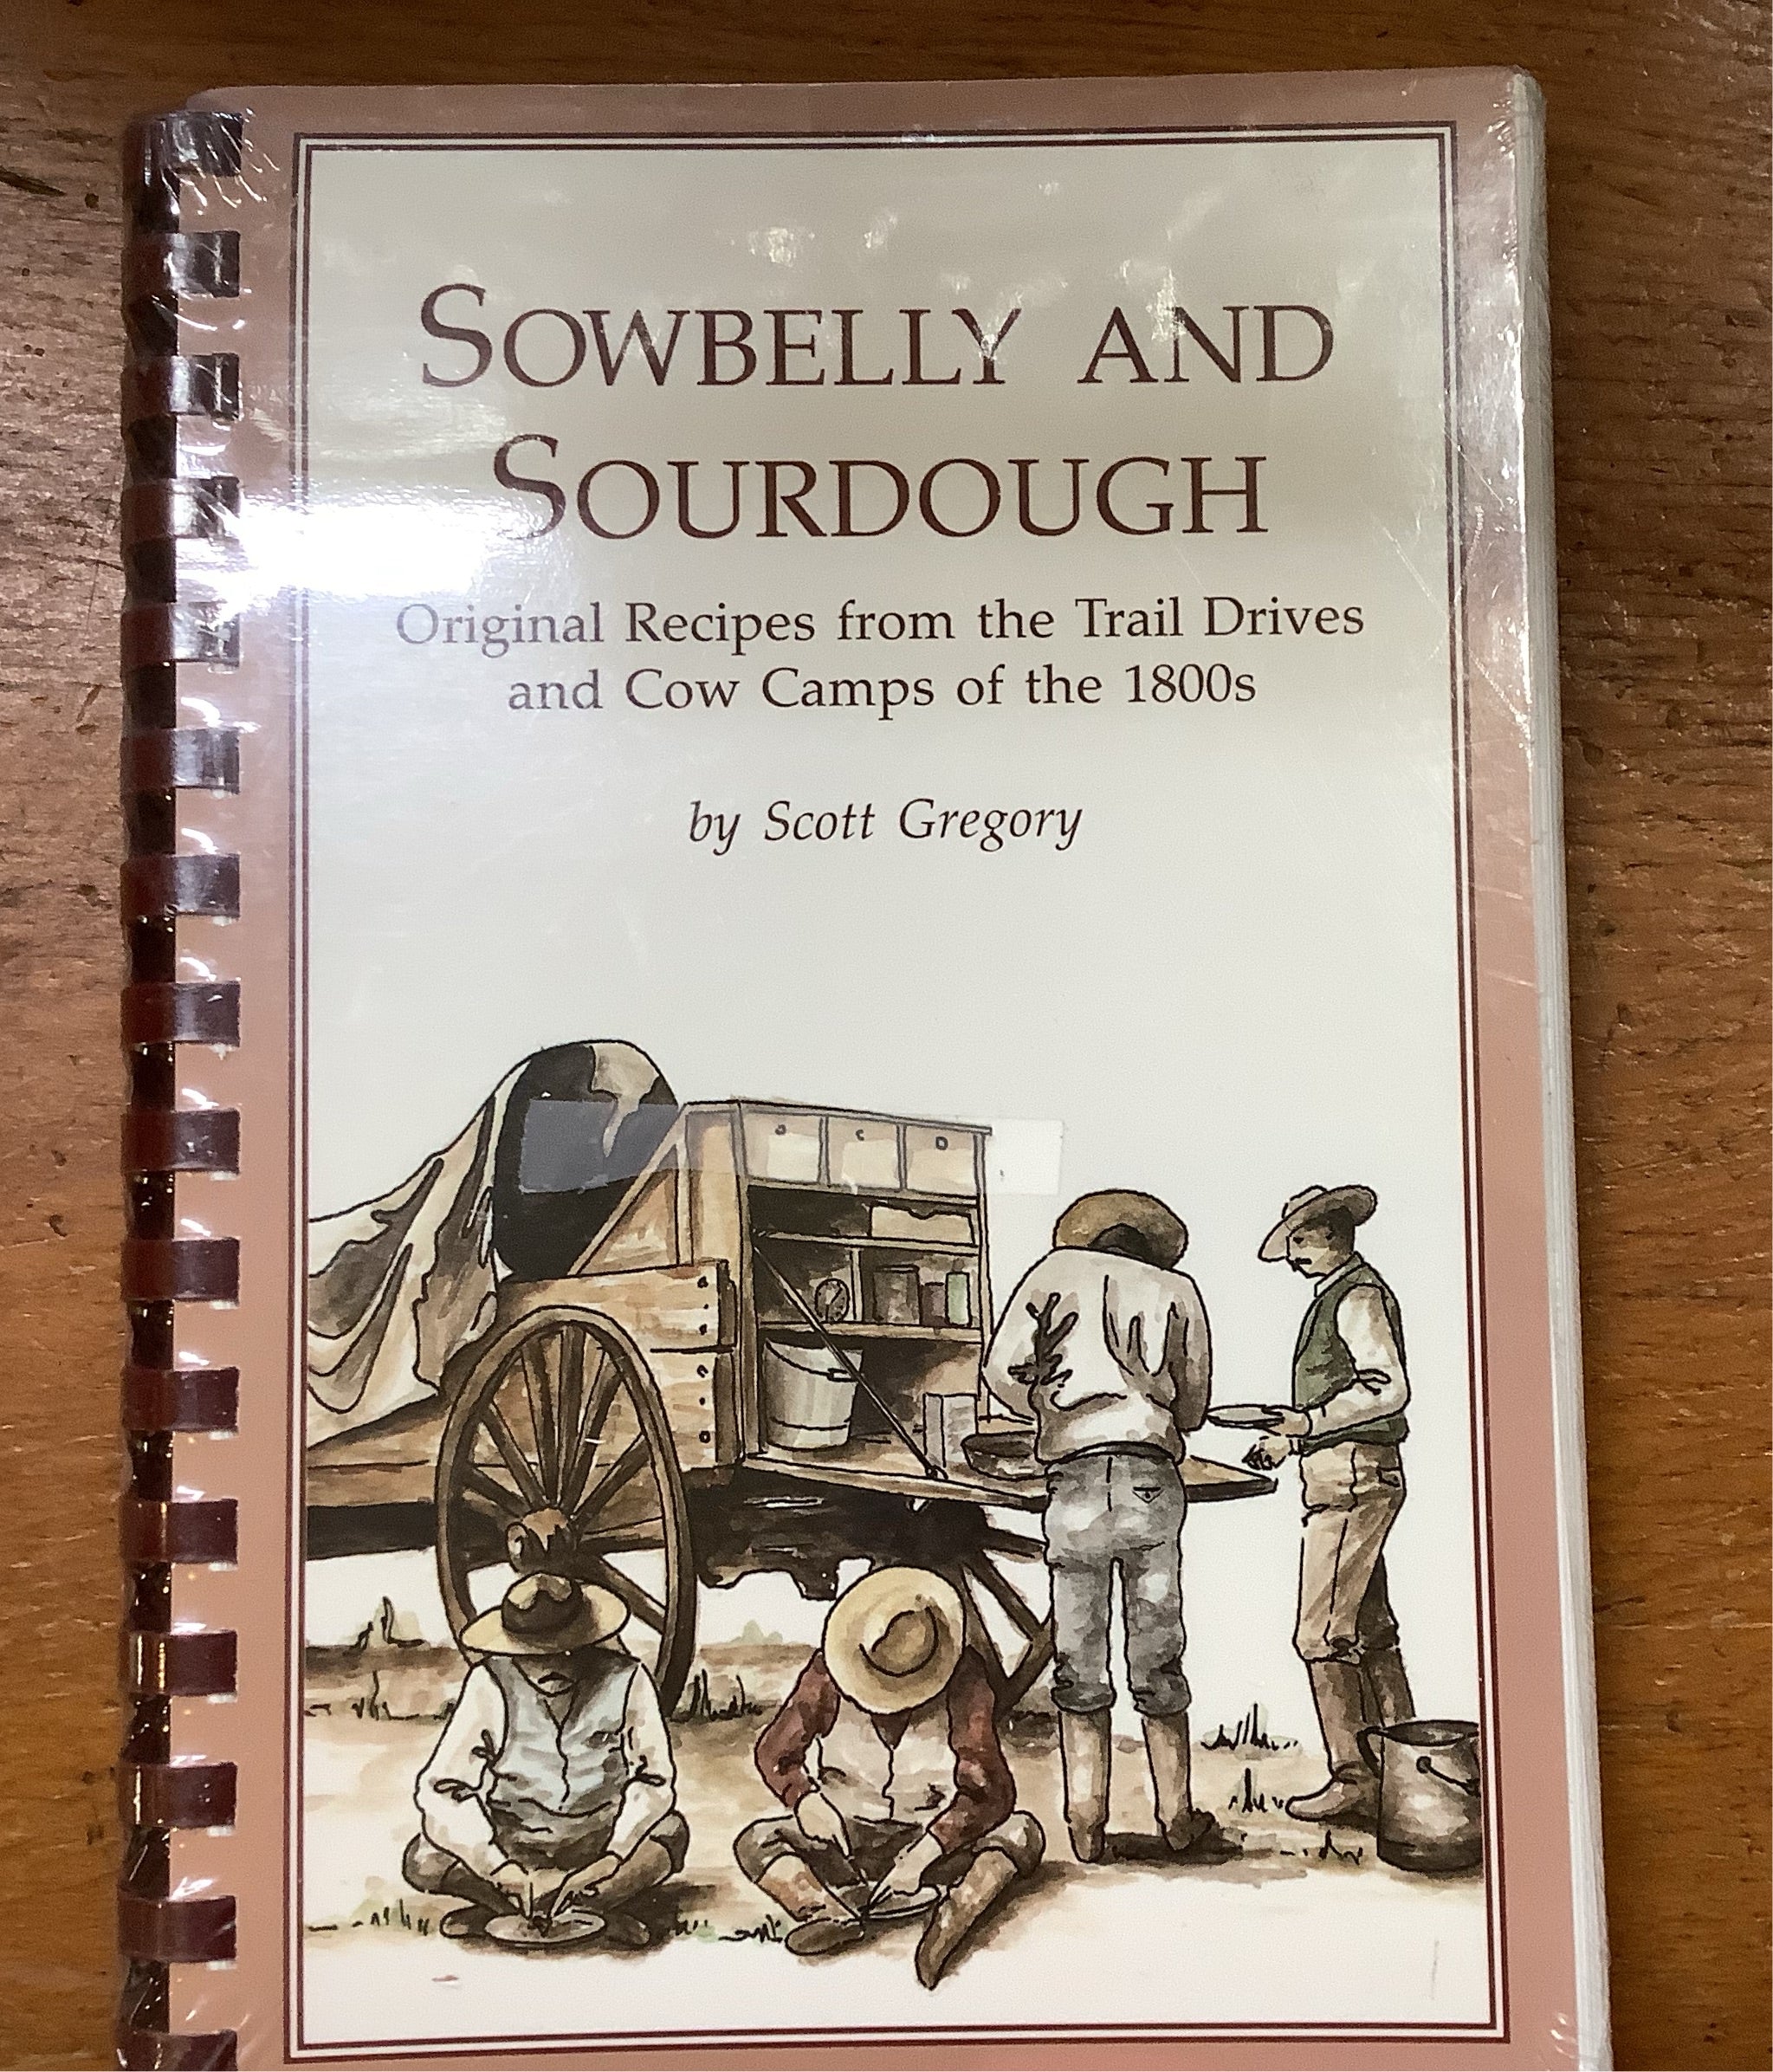 BOOKS - Sowbelly and Sourdough